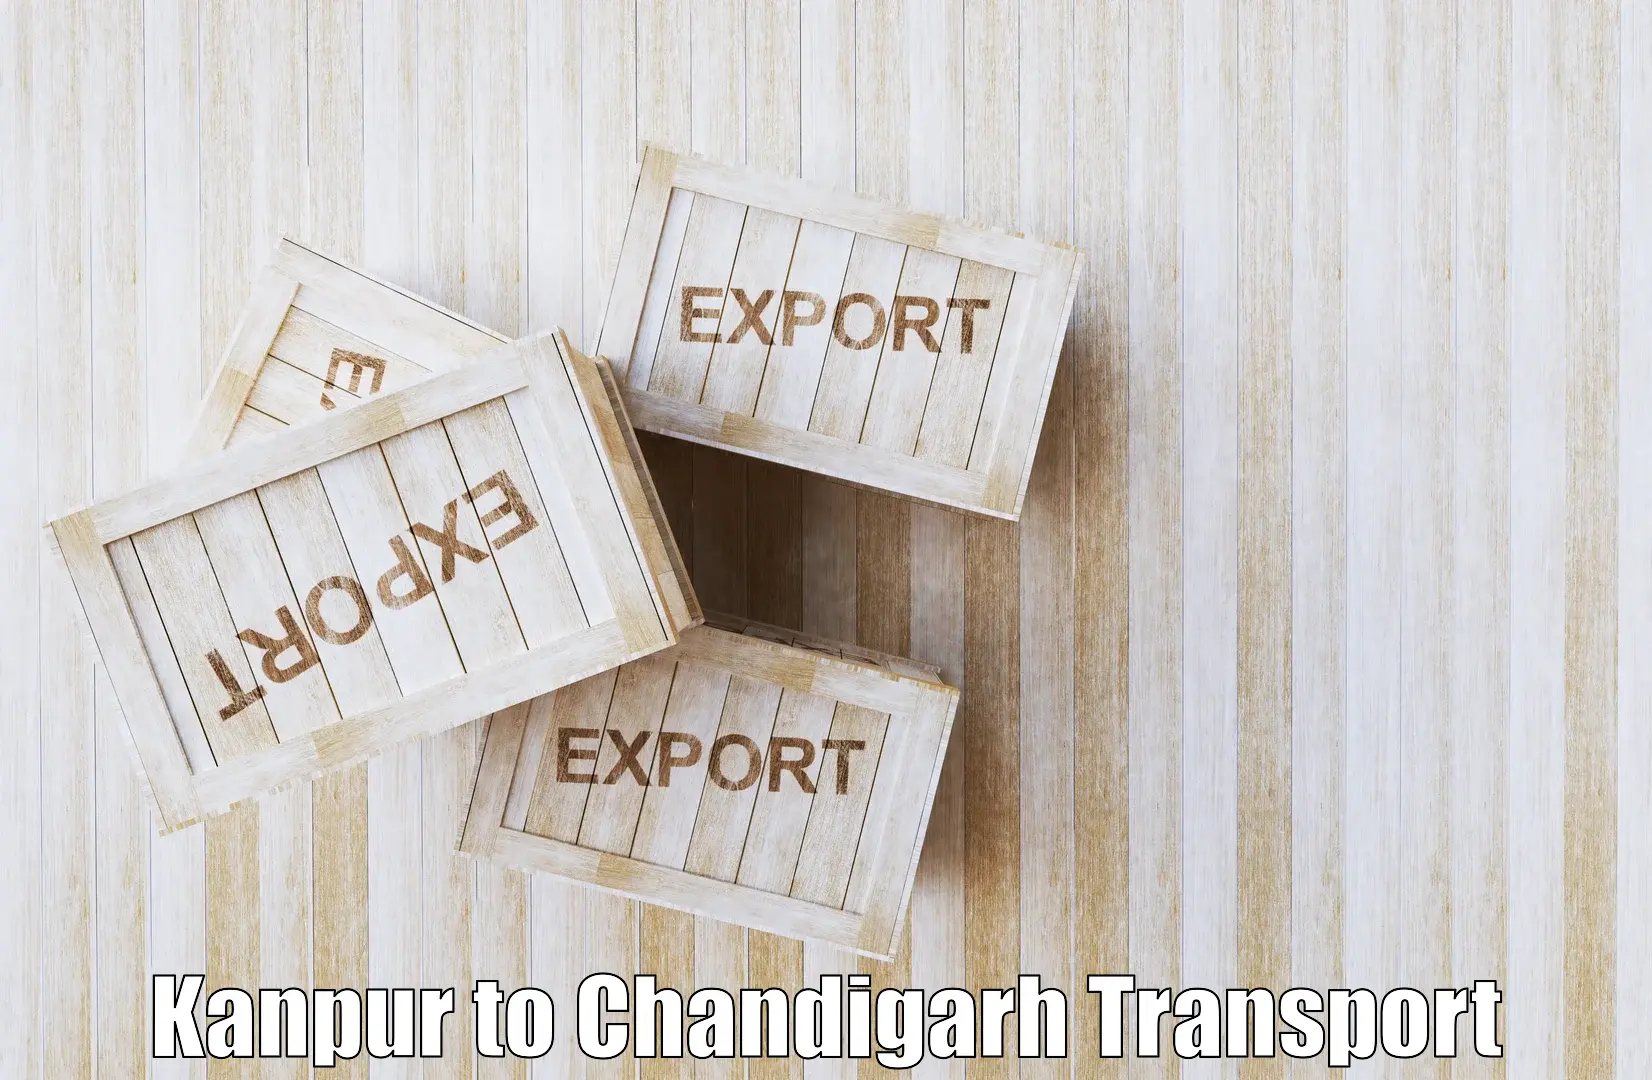 Air cargo transport services Kanpur to Chandigarh